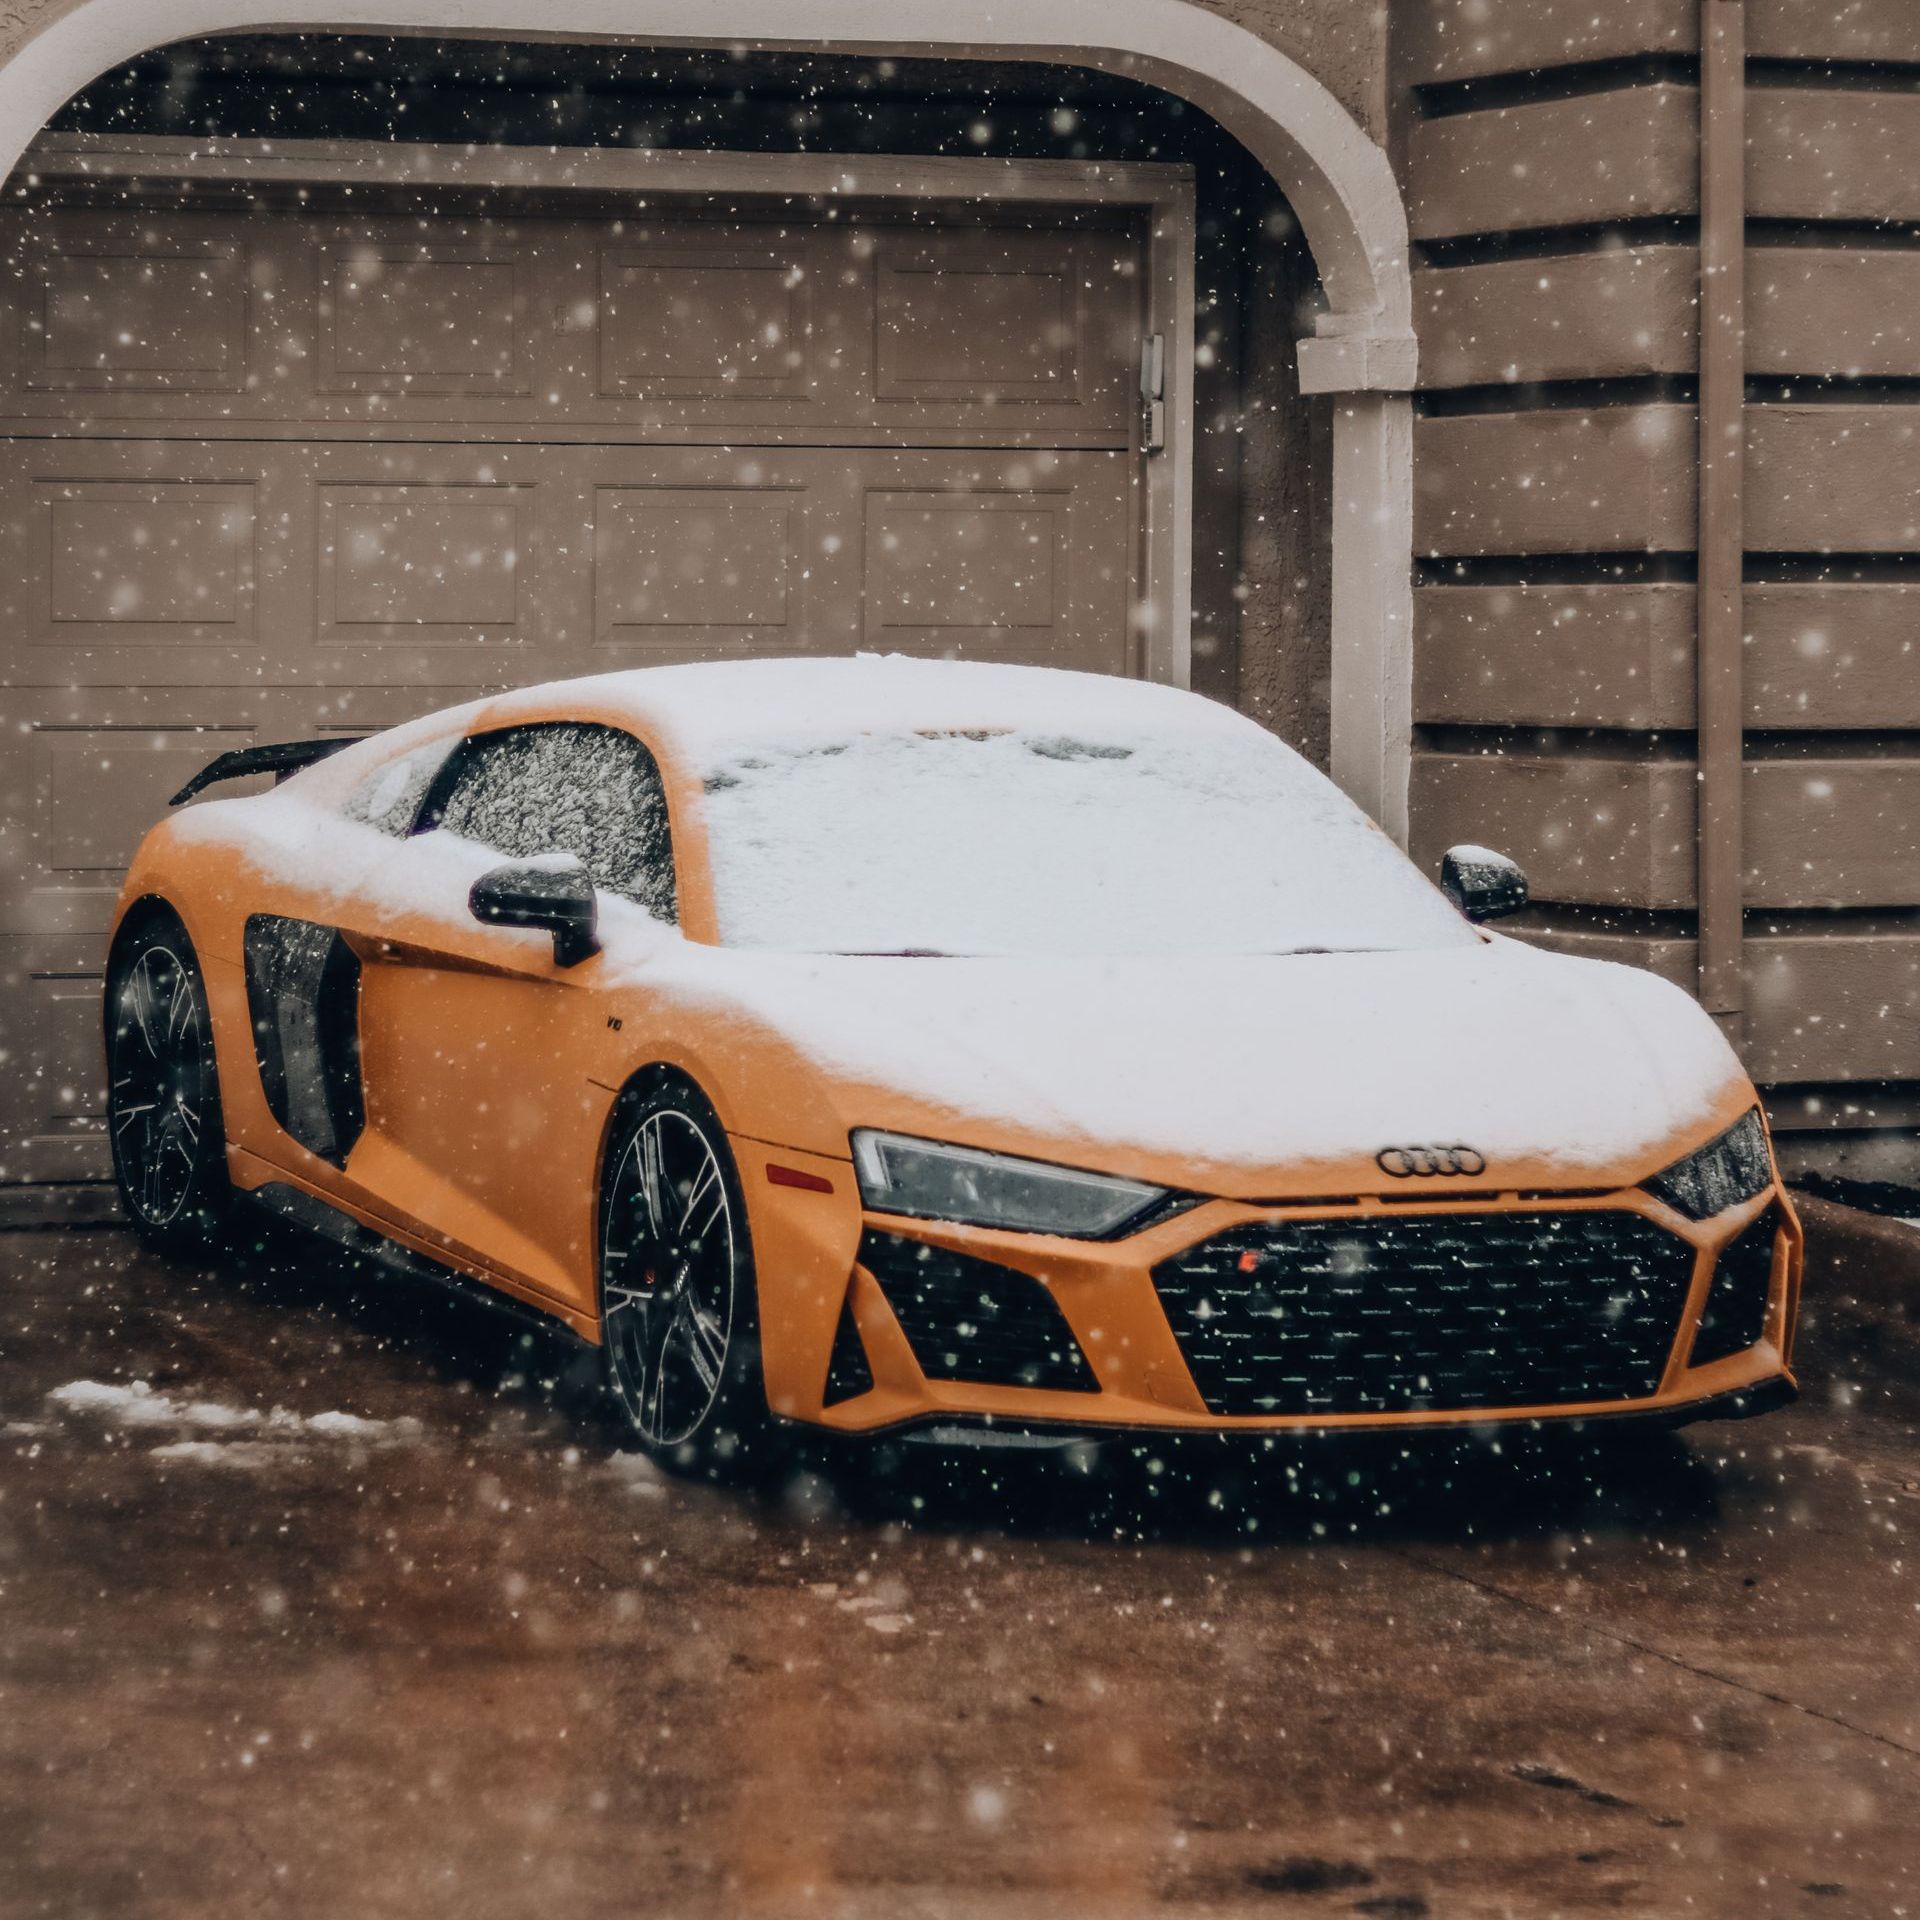 Supercar covered in snow, winter conditions.